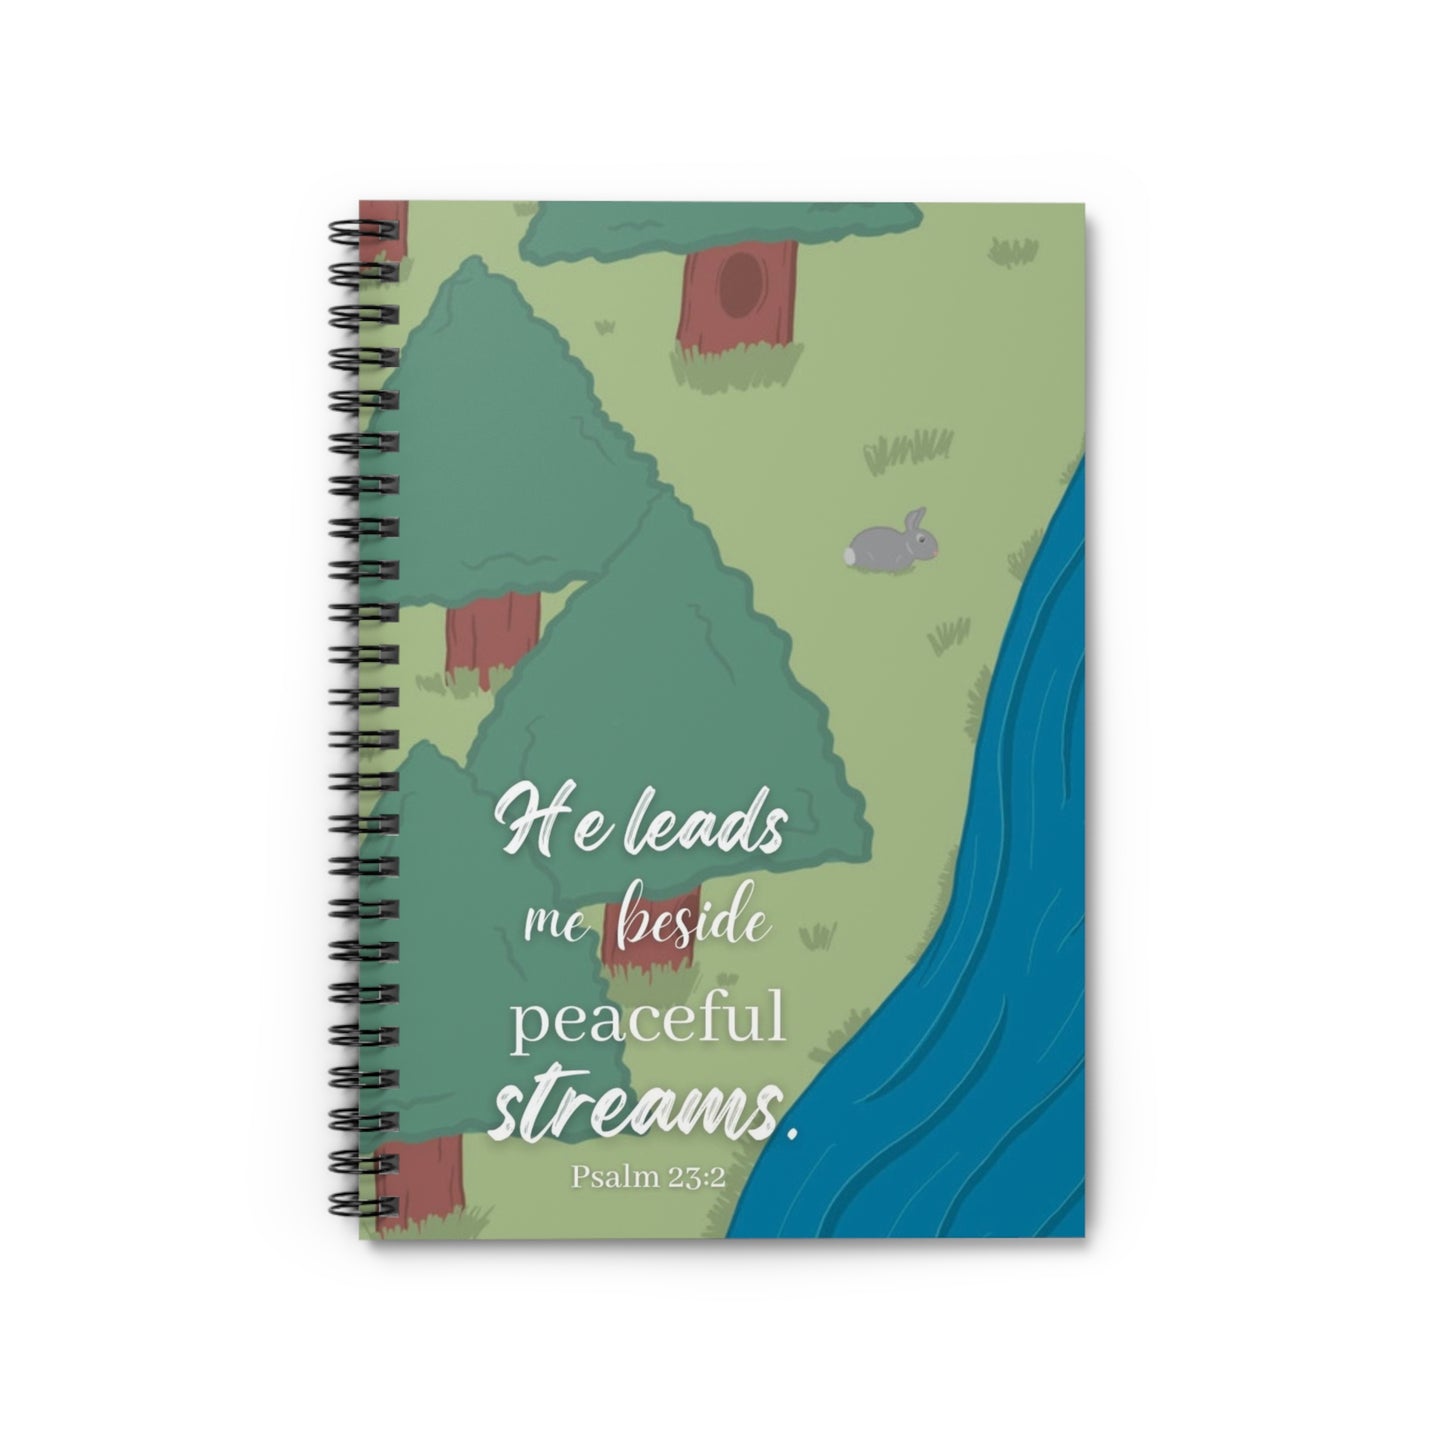 Spiral Notebook - Forest Stream - Psalm 23:2 - Ruled Line